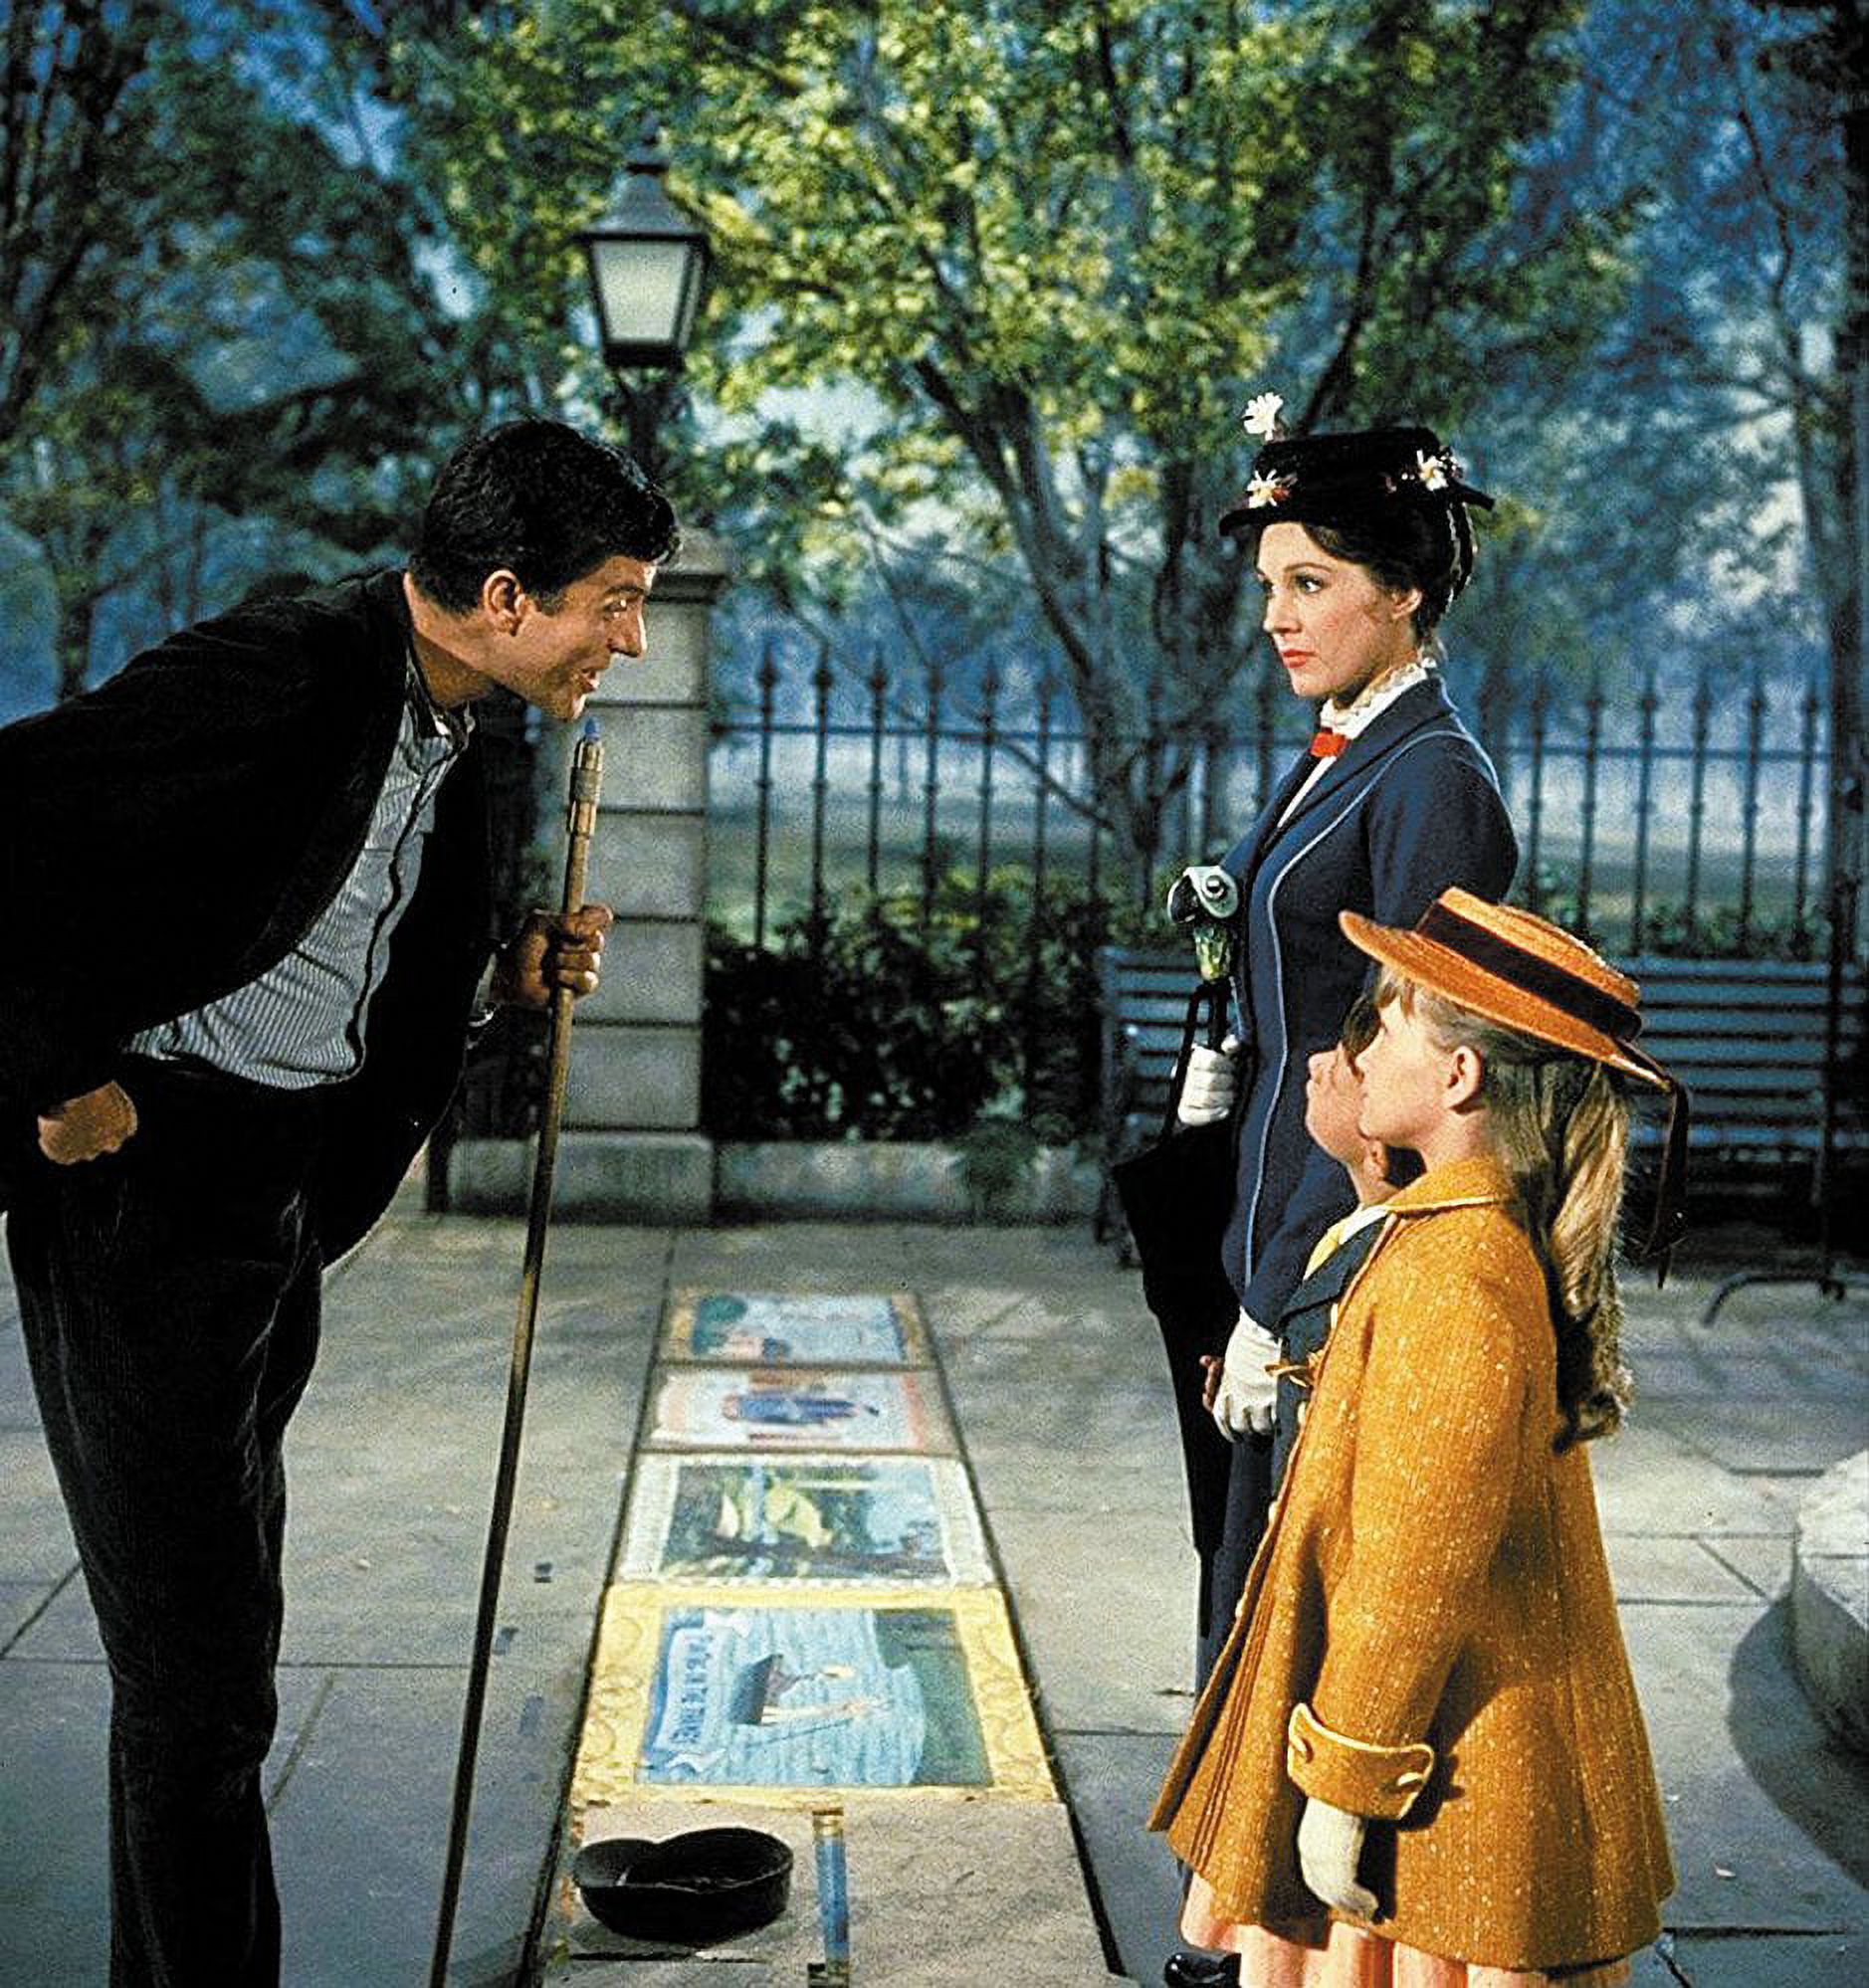 Mary Poppins (DVD + Digital Code) 50th Anniversary Edition - image 3 of 5